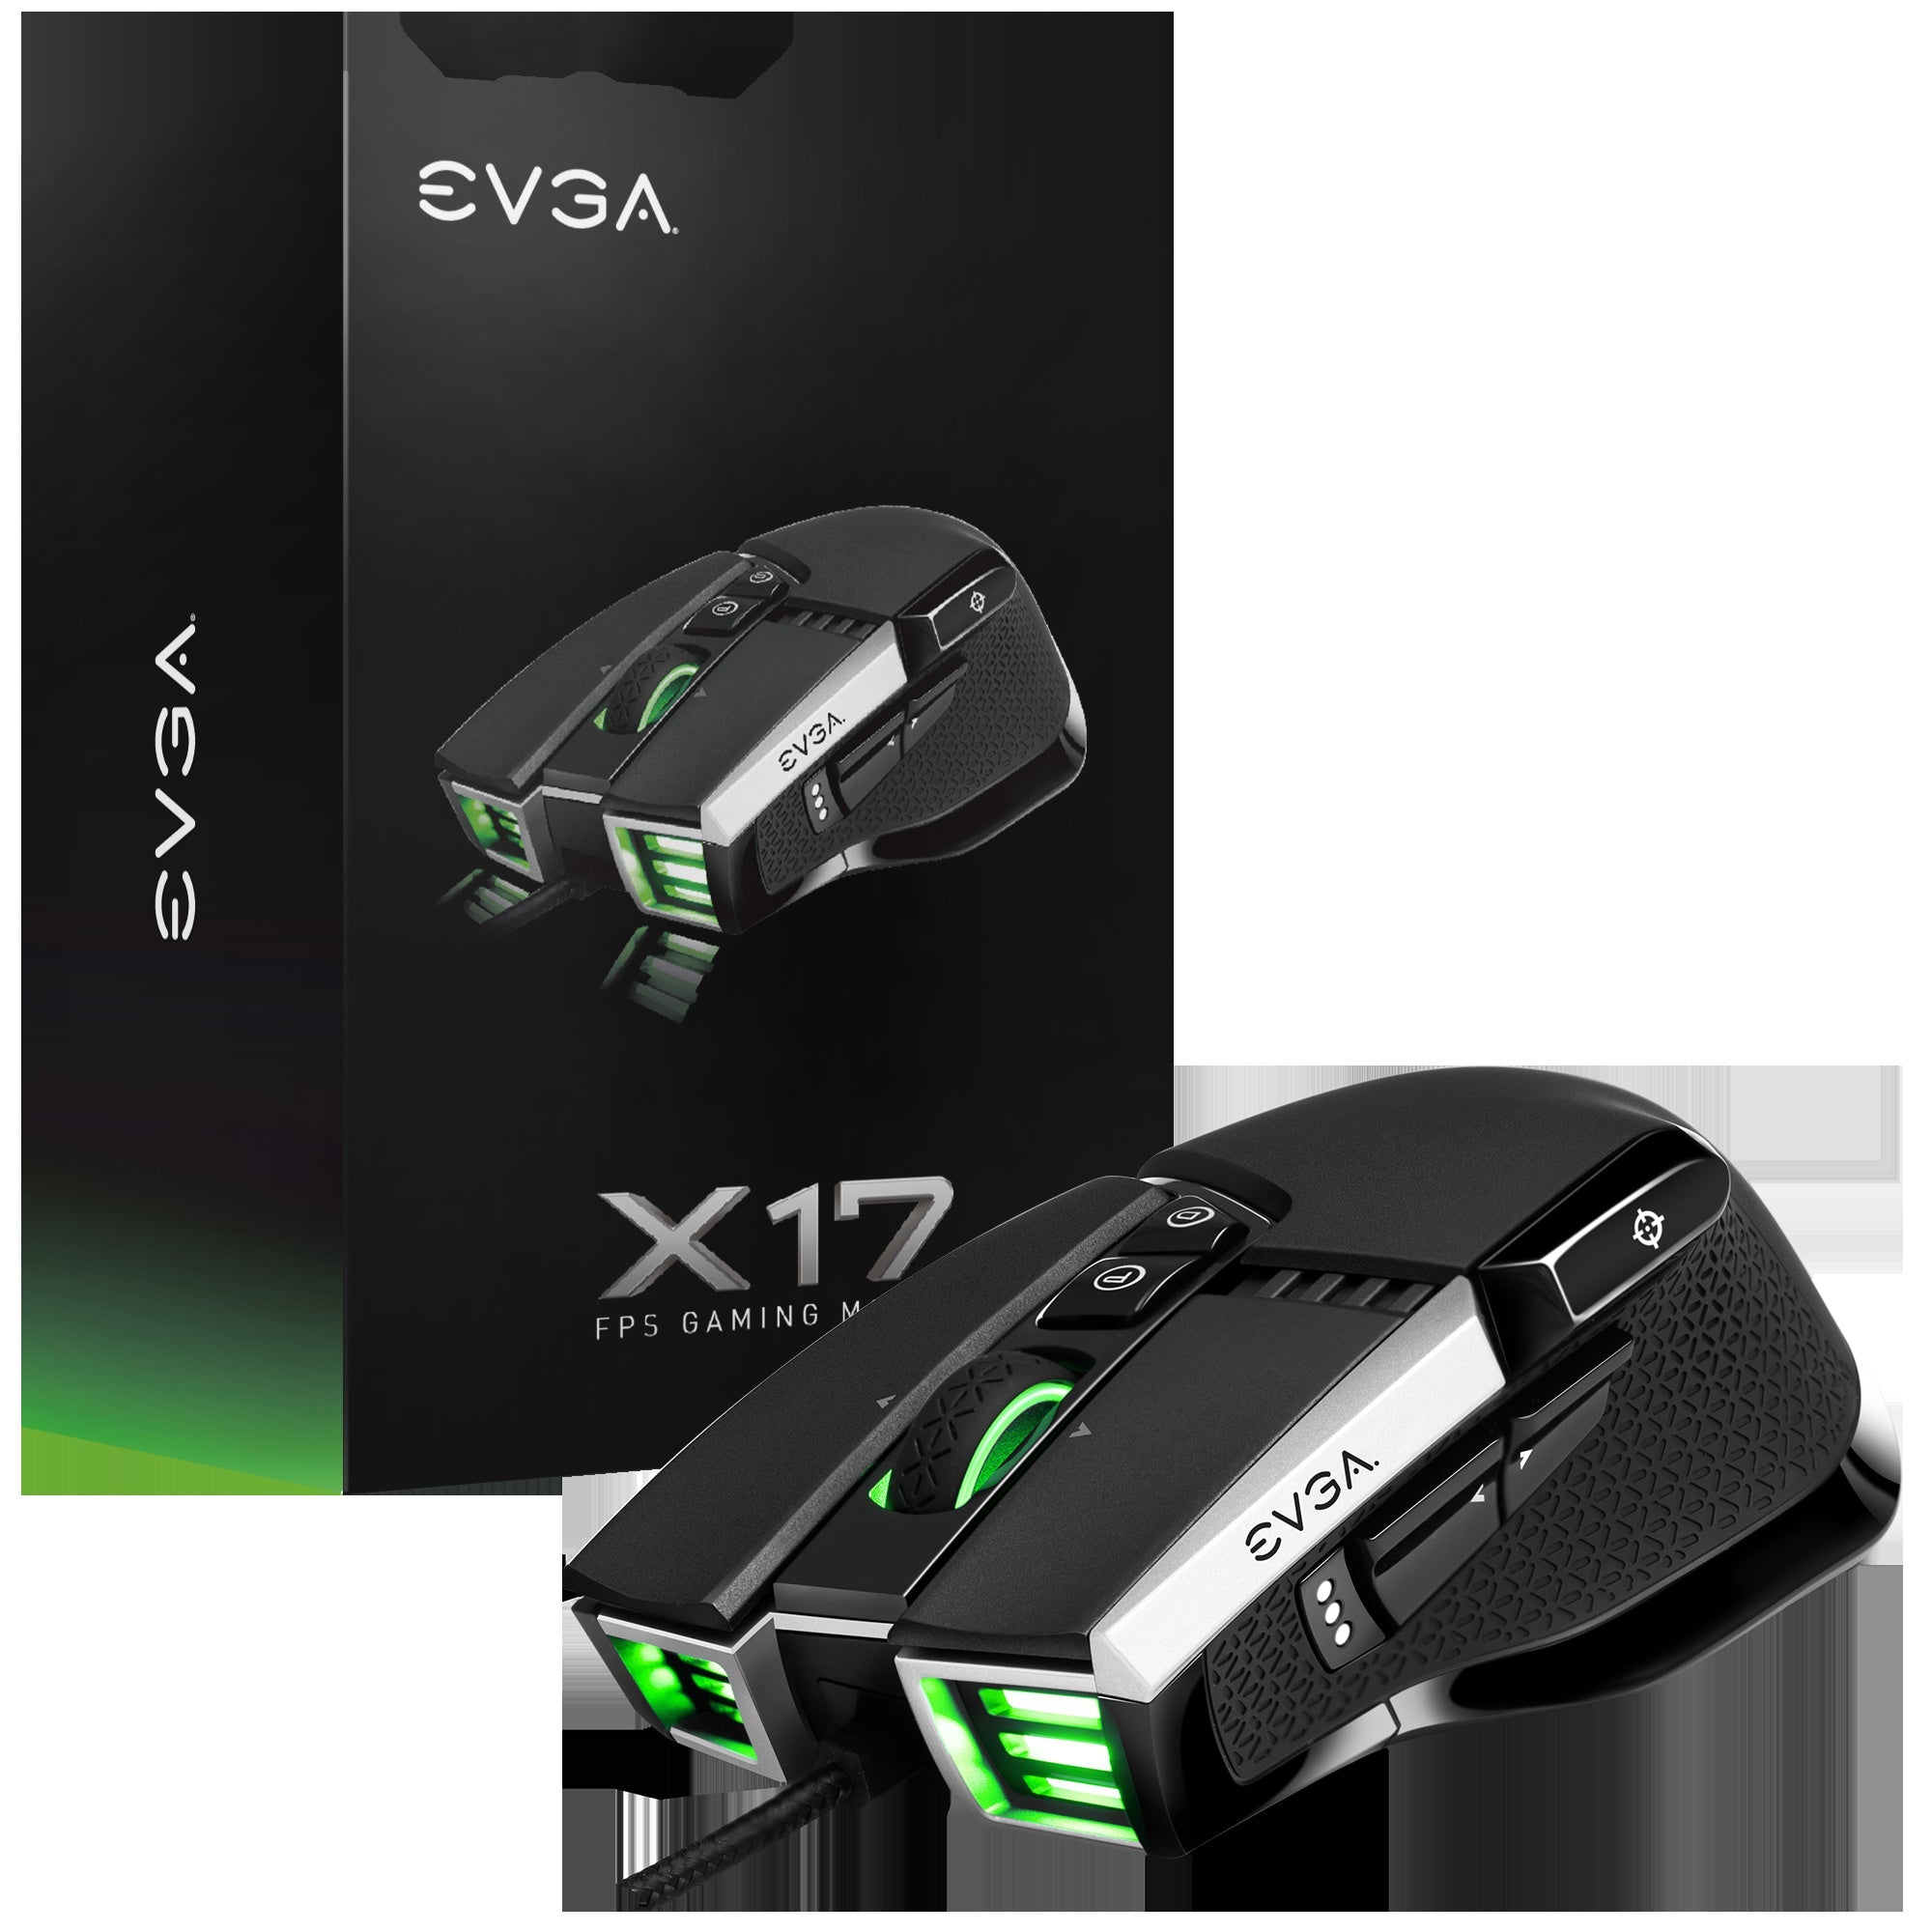 EVGA Mouse 903-W1-17BK-KR X17 Gaming Mouse Wired - Geek Tech